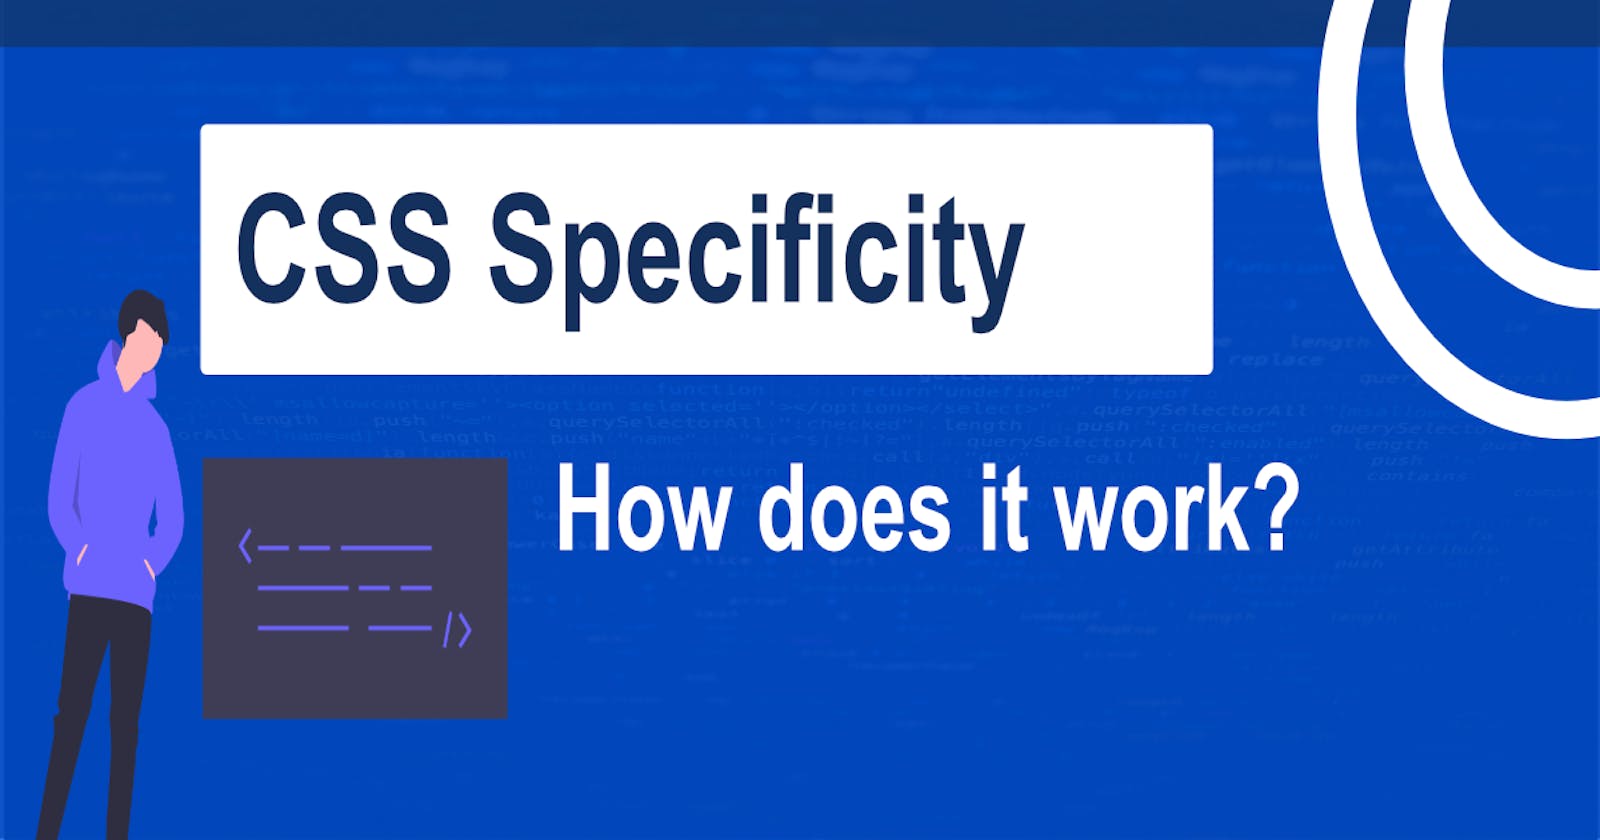 CSS Specificity Explained